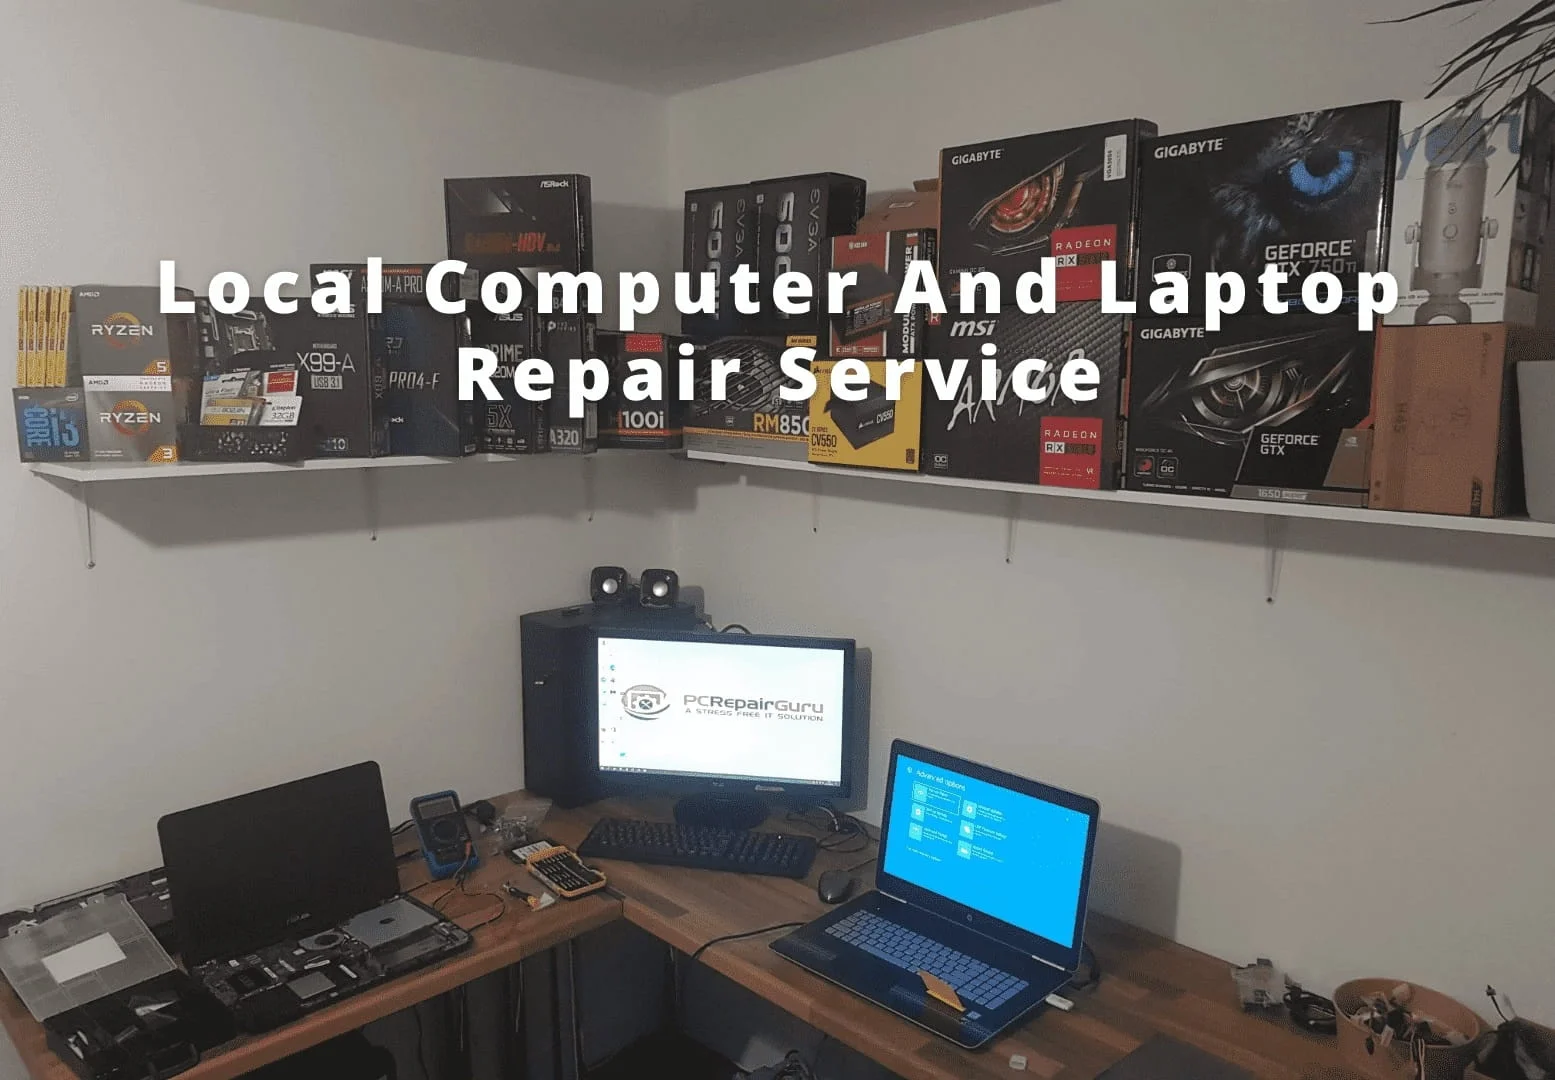 Local Computer And Laptop Repair Service